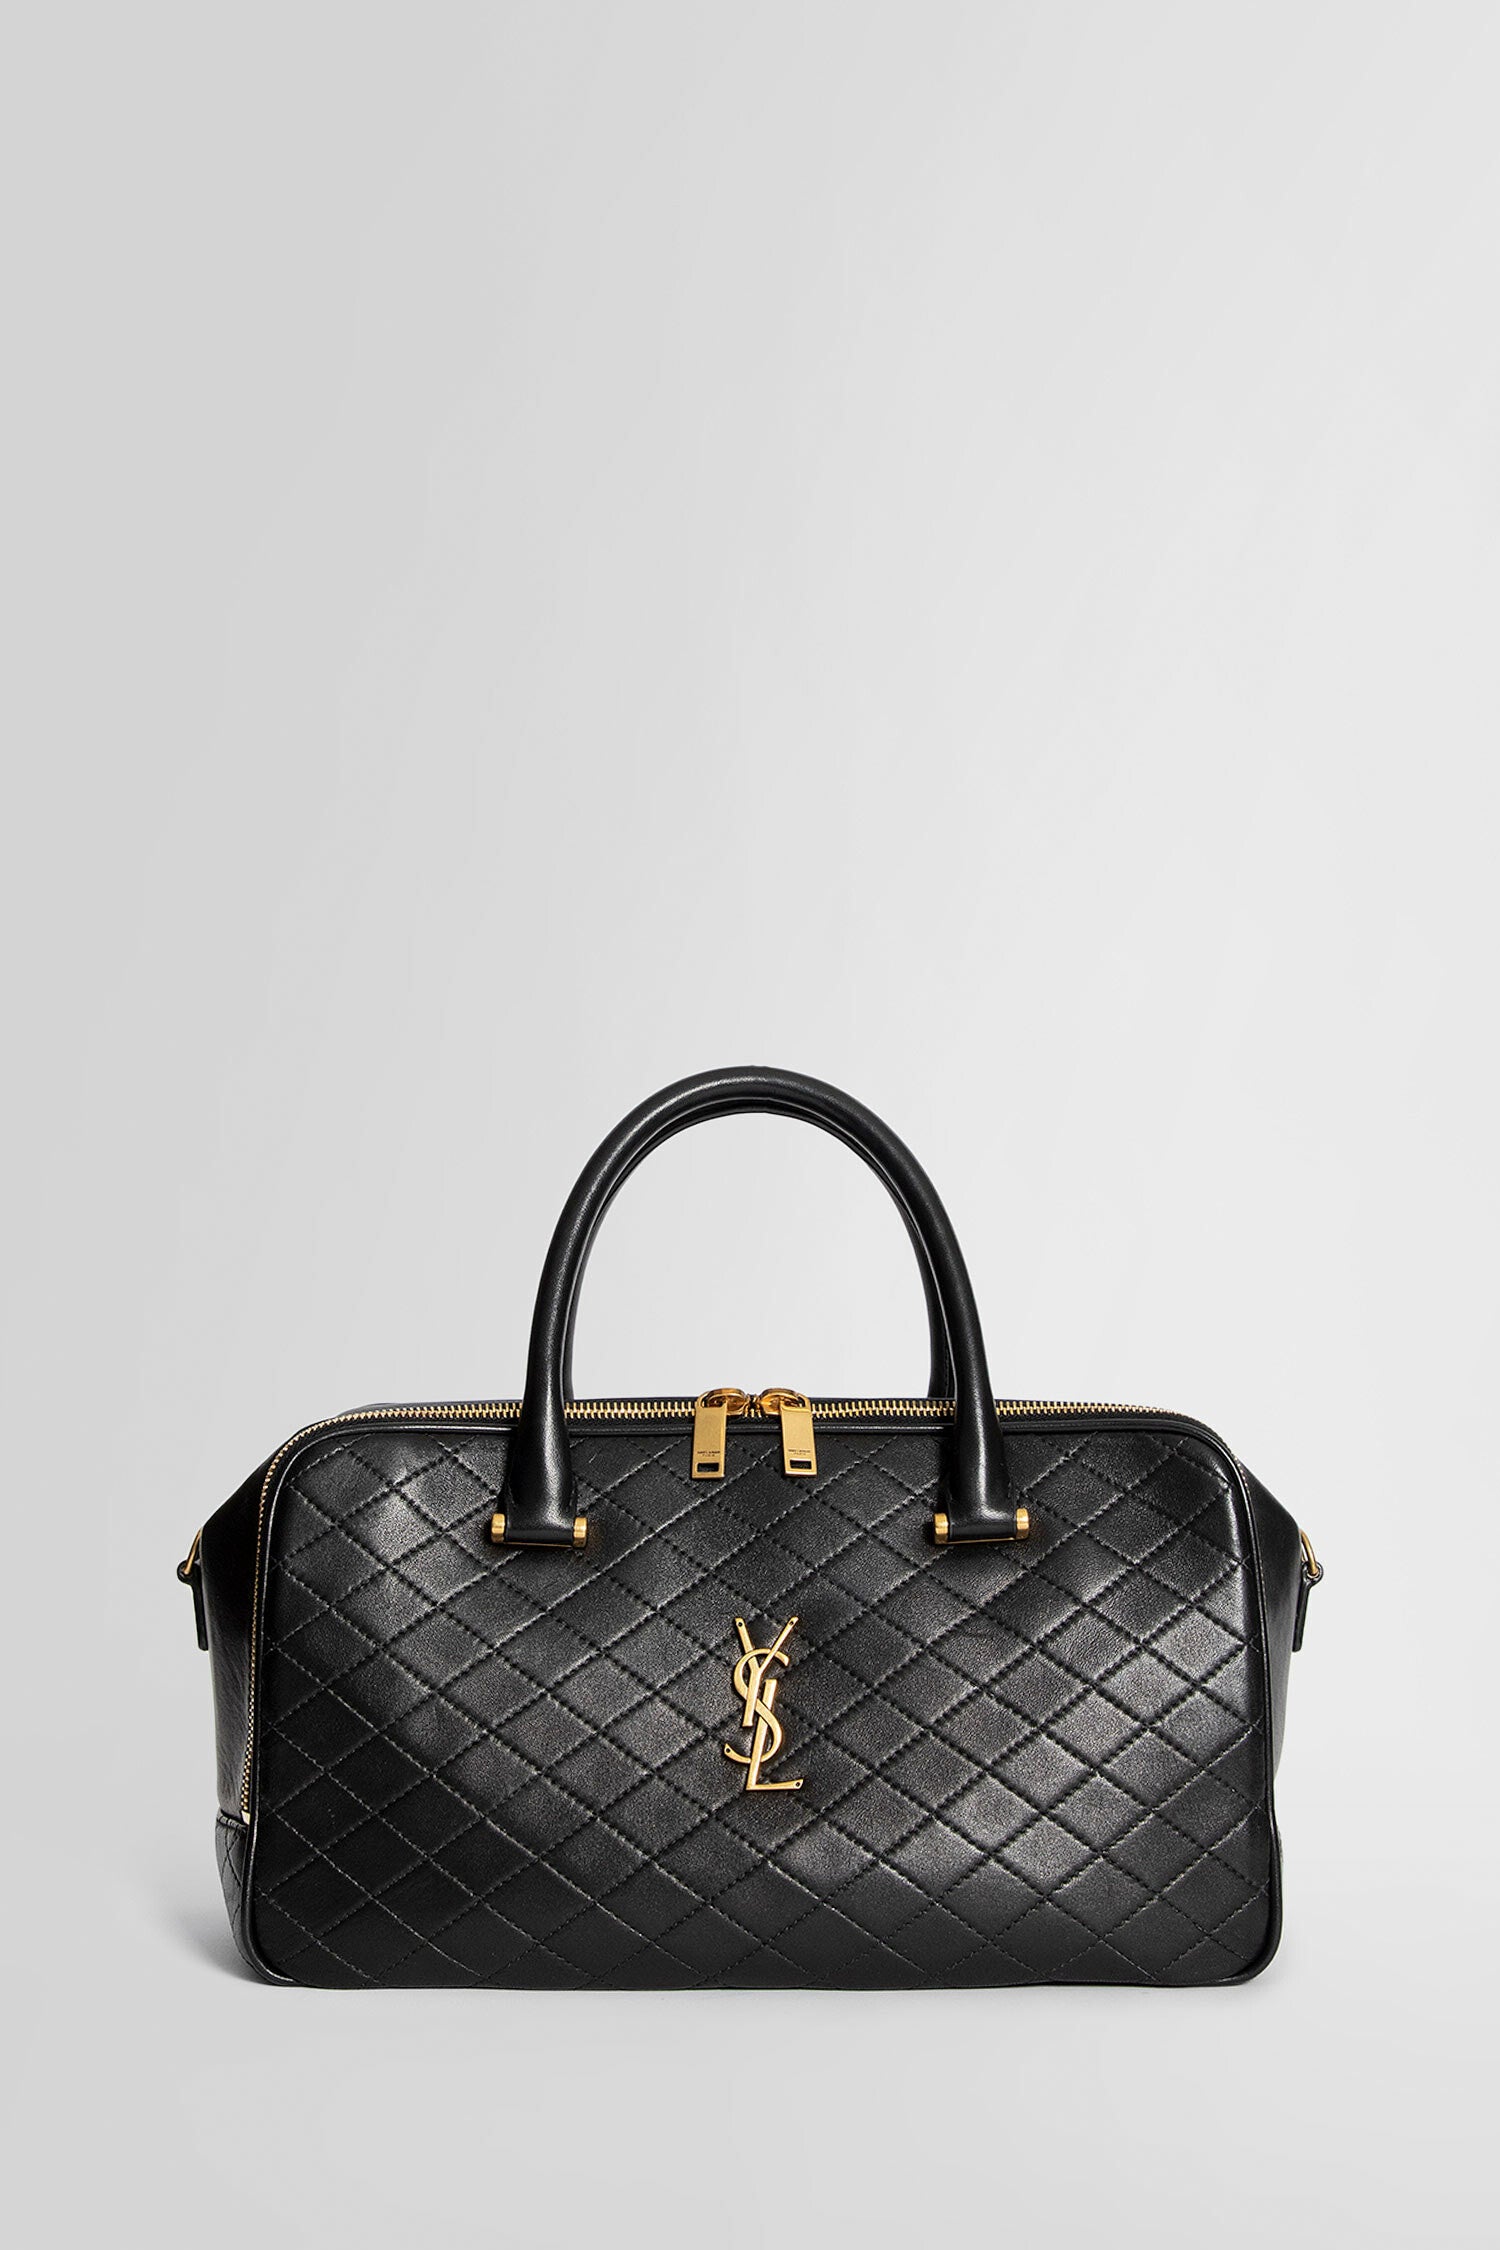 Saint Laurent Small Cabas Monogramme Quilted Bag